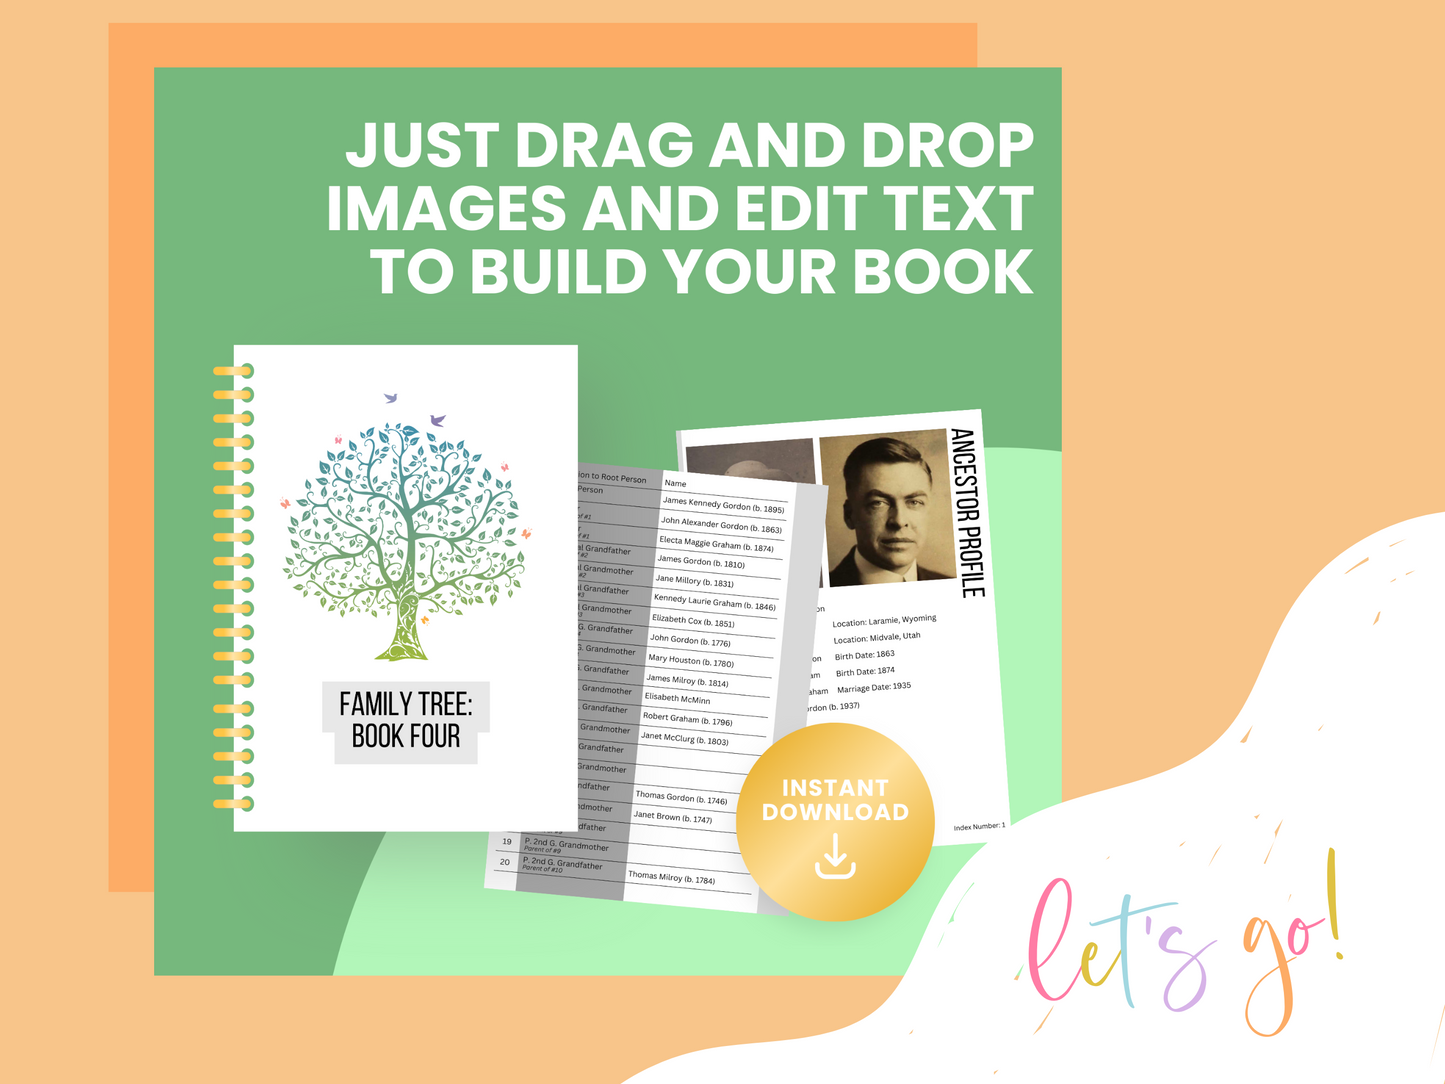 Book Four: All-in-One Family Tree Canva Template